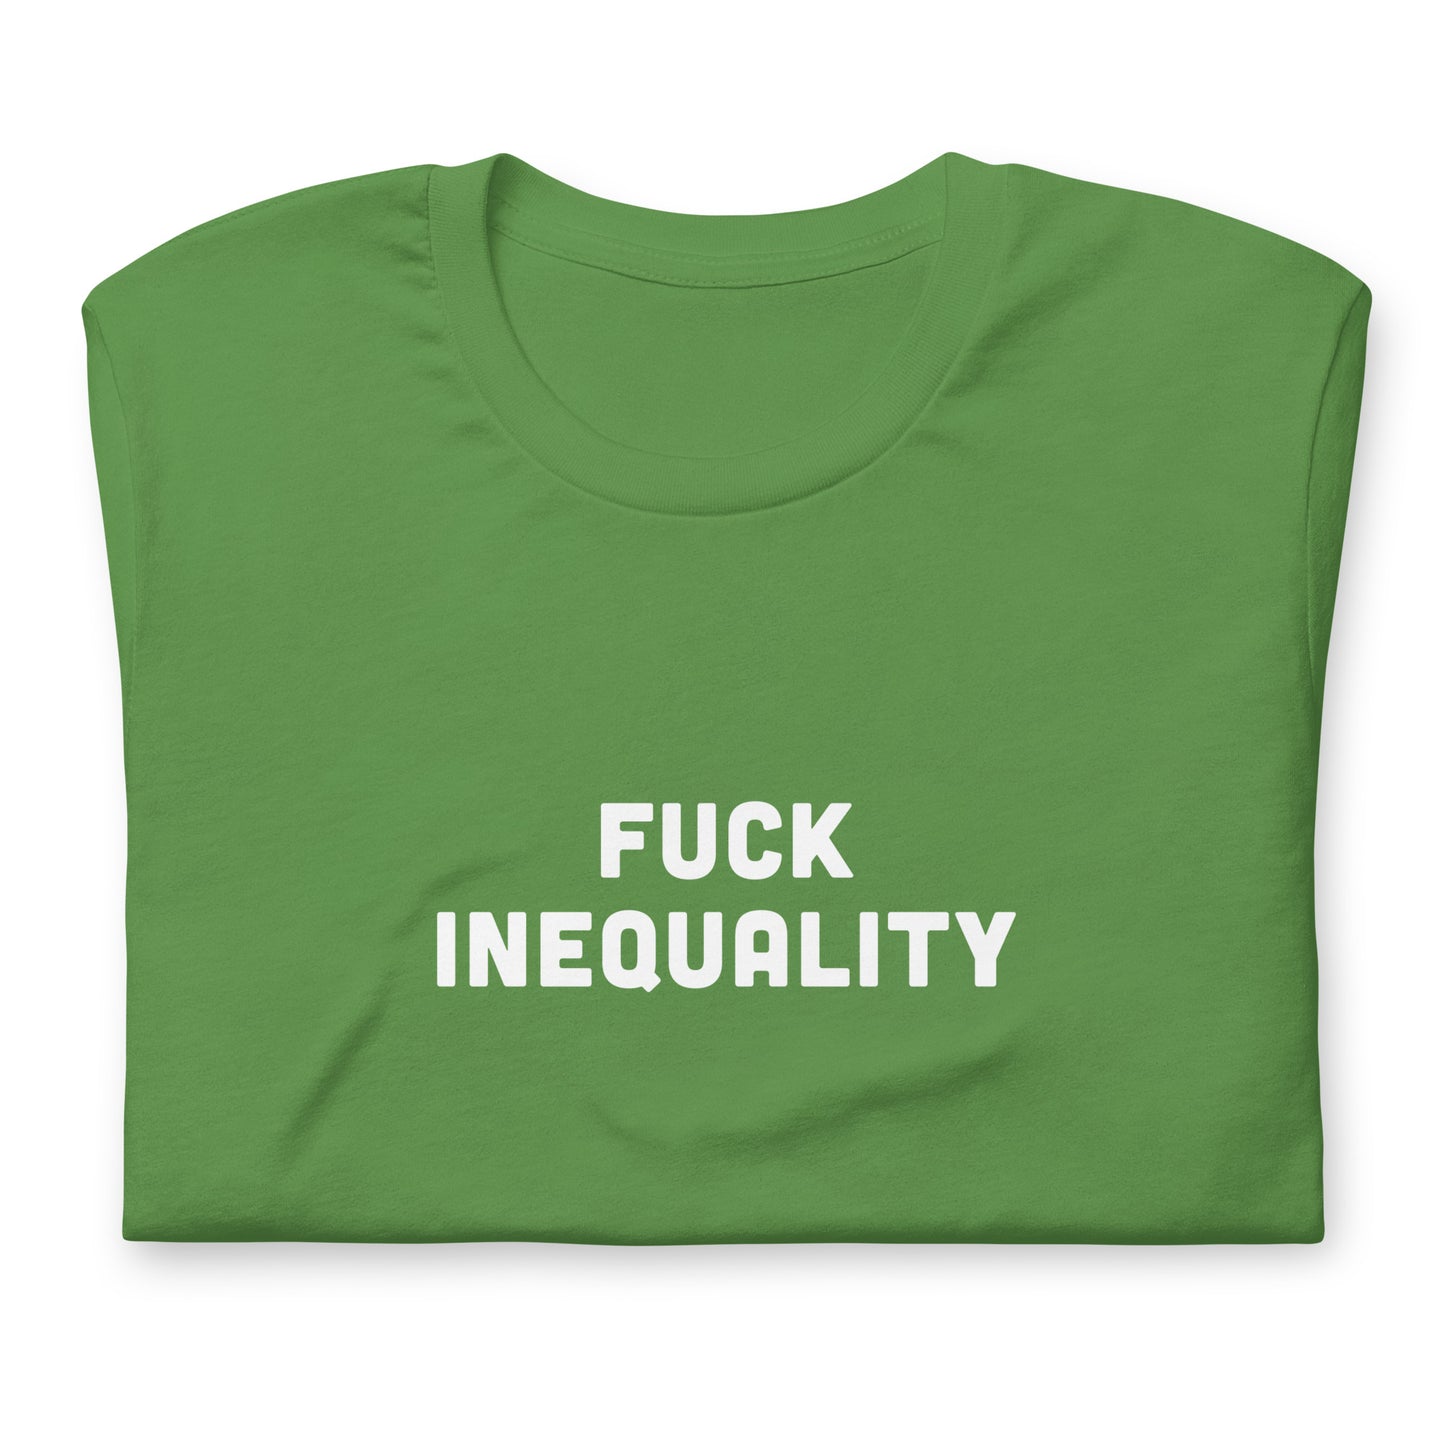 Fuck Inequality T-Shirt Size 2XL Color Navy